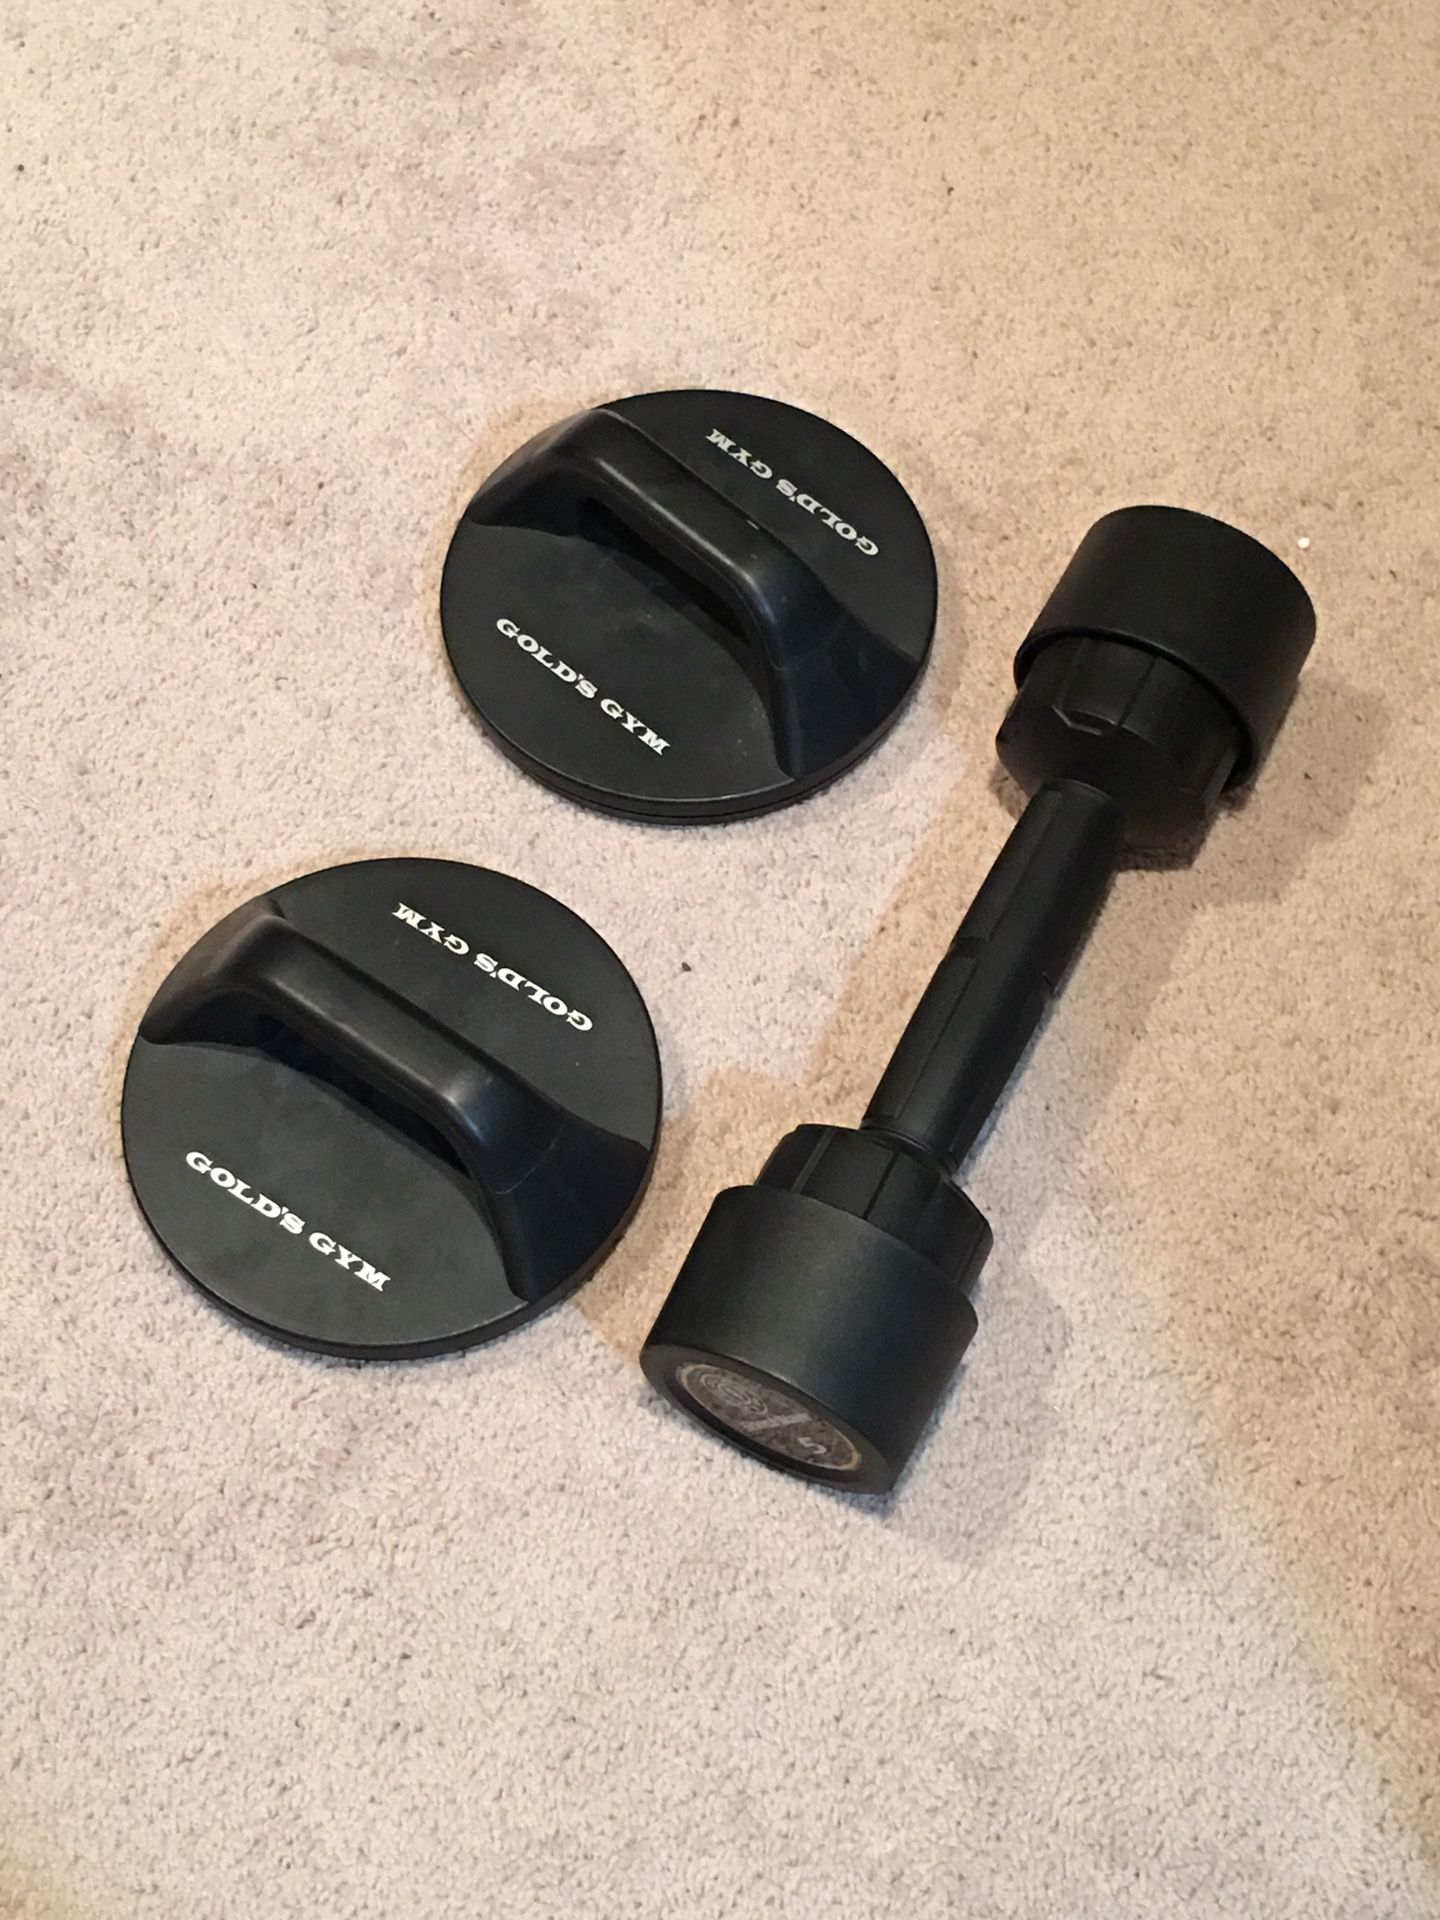 Push-up Stands and Weight